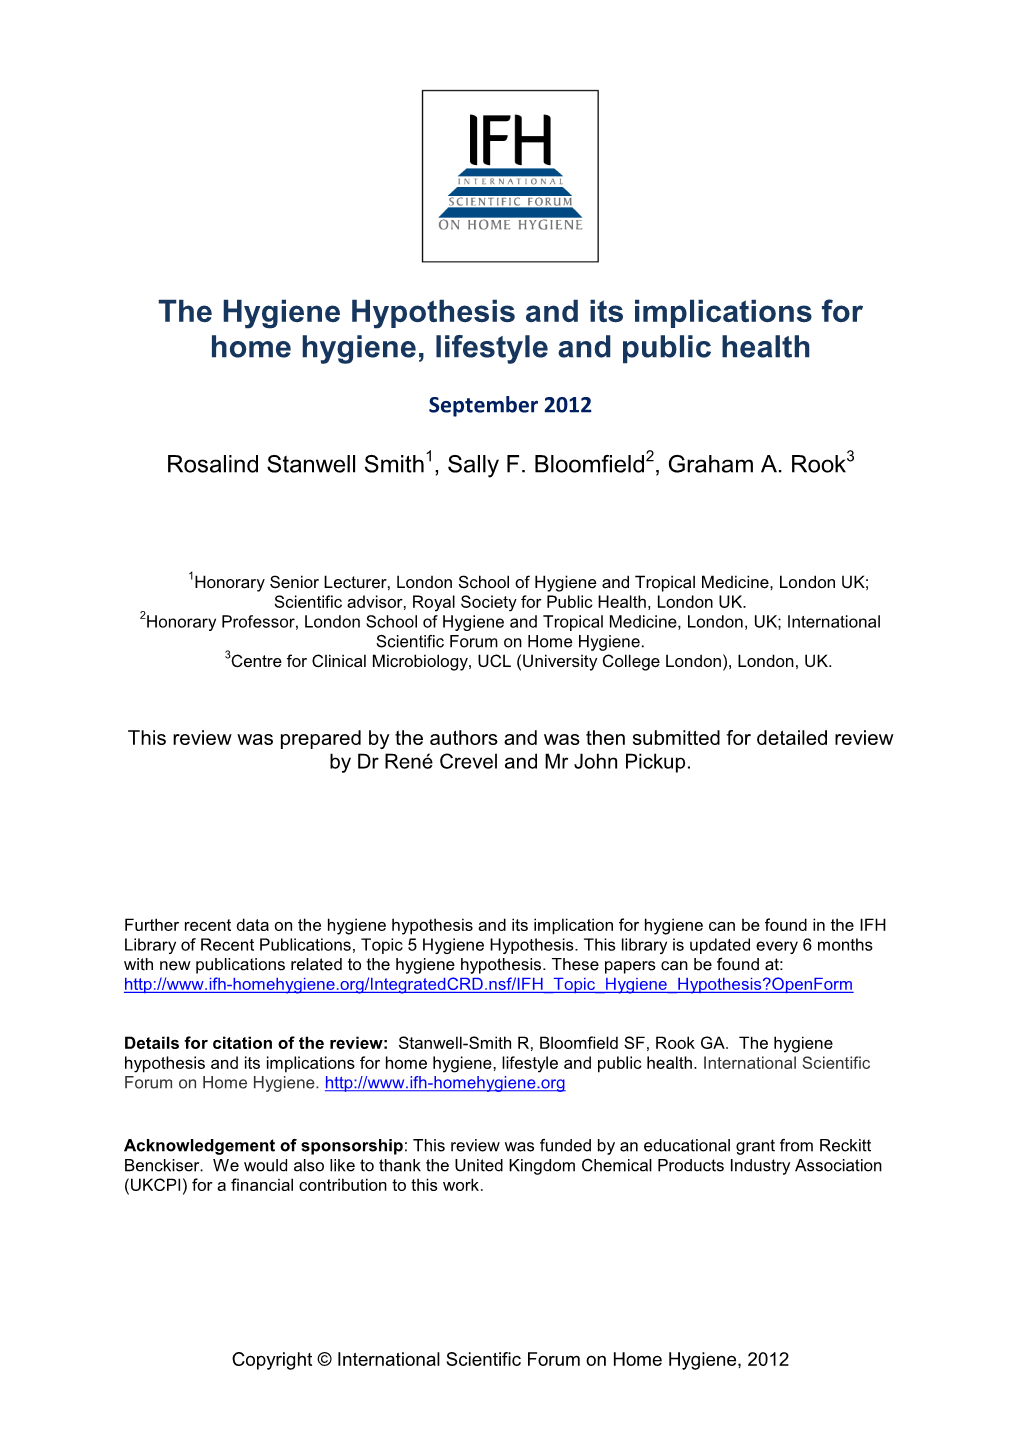 The Hygiene Hypothesis and Its Implications for Home Hygiene, Lifestyle and Public Health